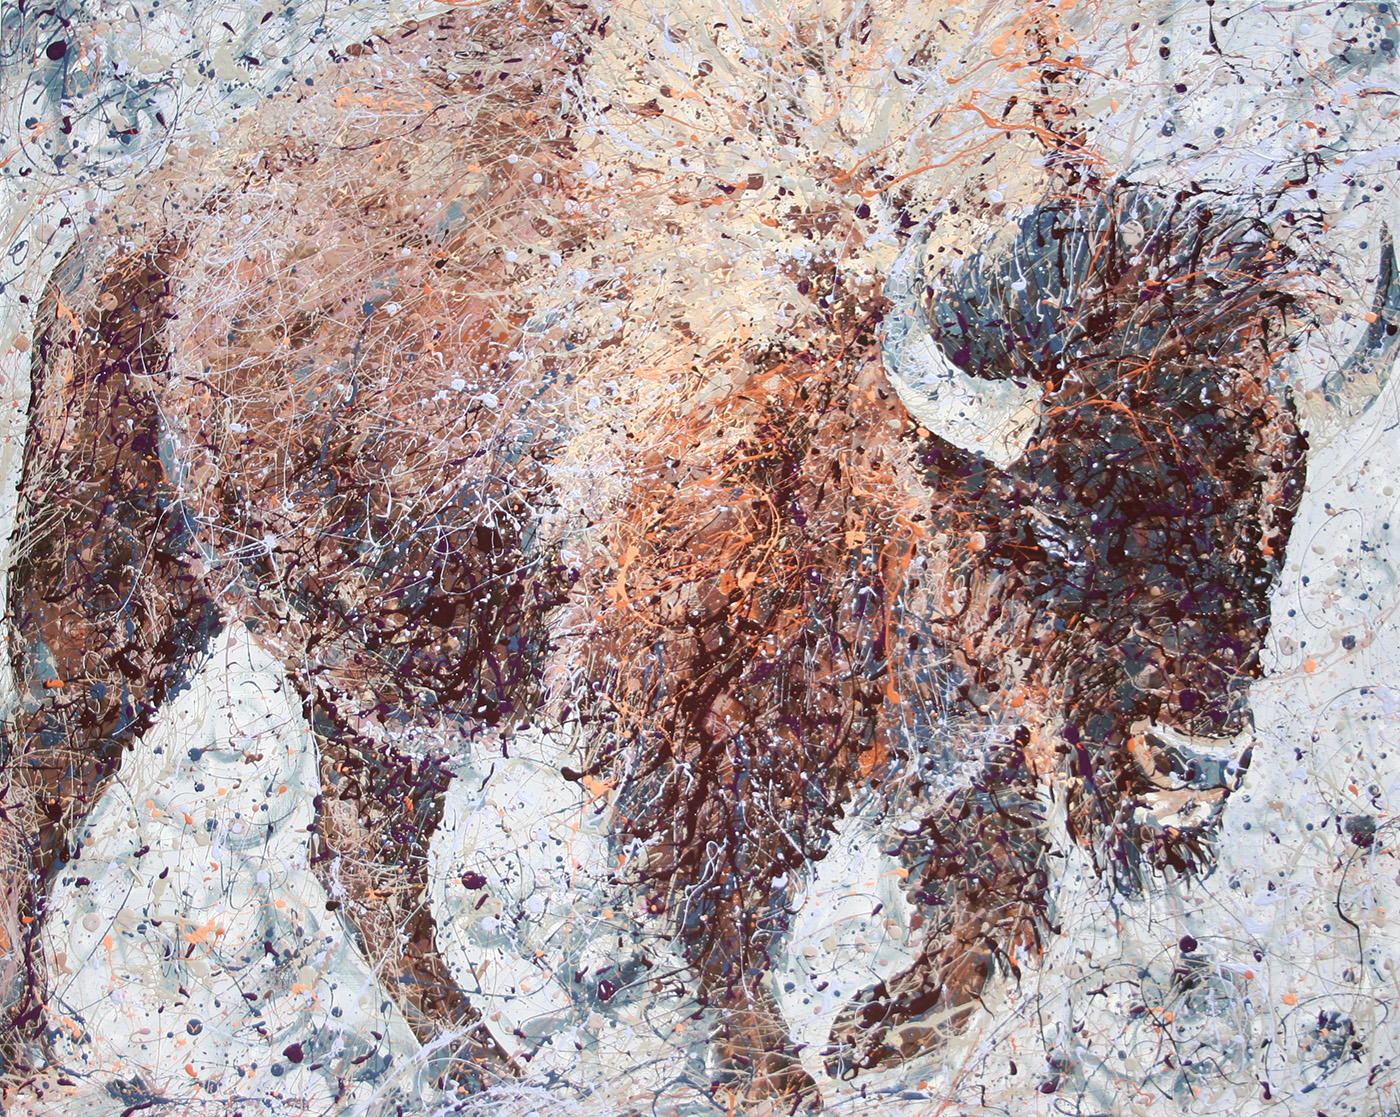 Wyoming Buffalo, Latex Enamel Painting on Gallery Wrapped Canvas by Fort Collins, Colorado Artist  Lisa Cameron Russell